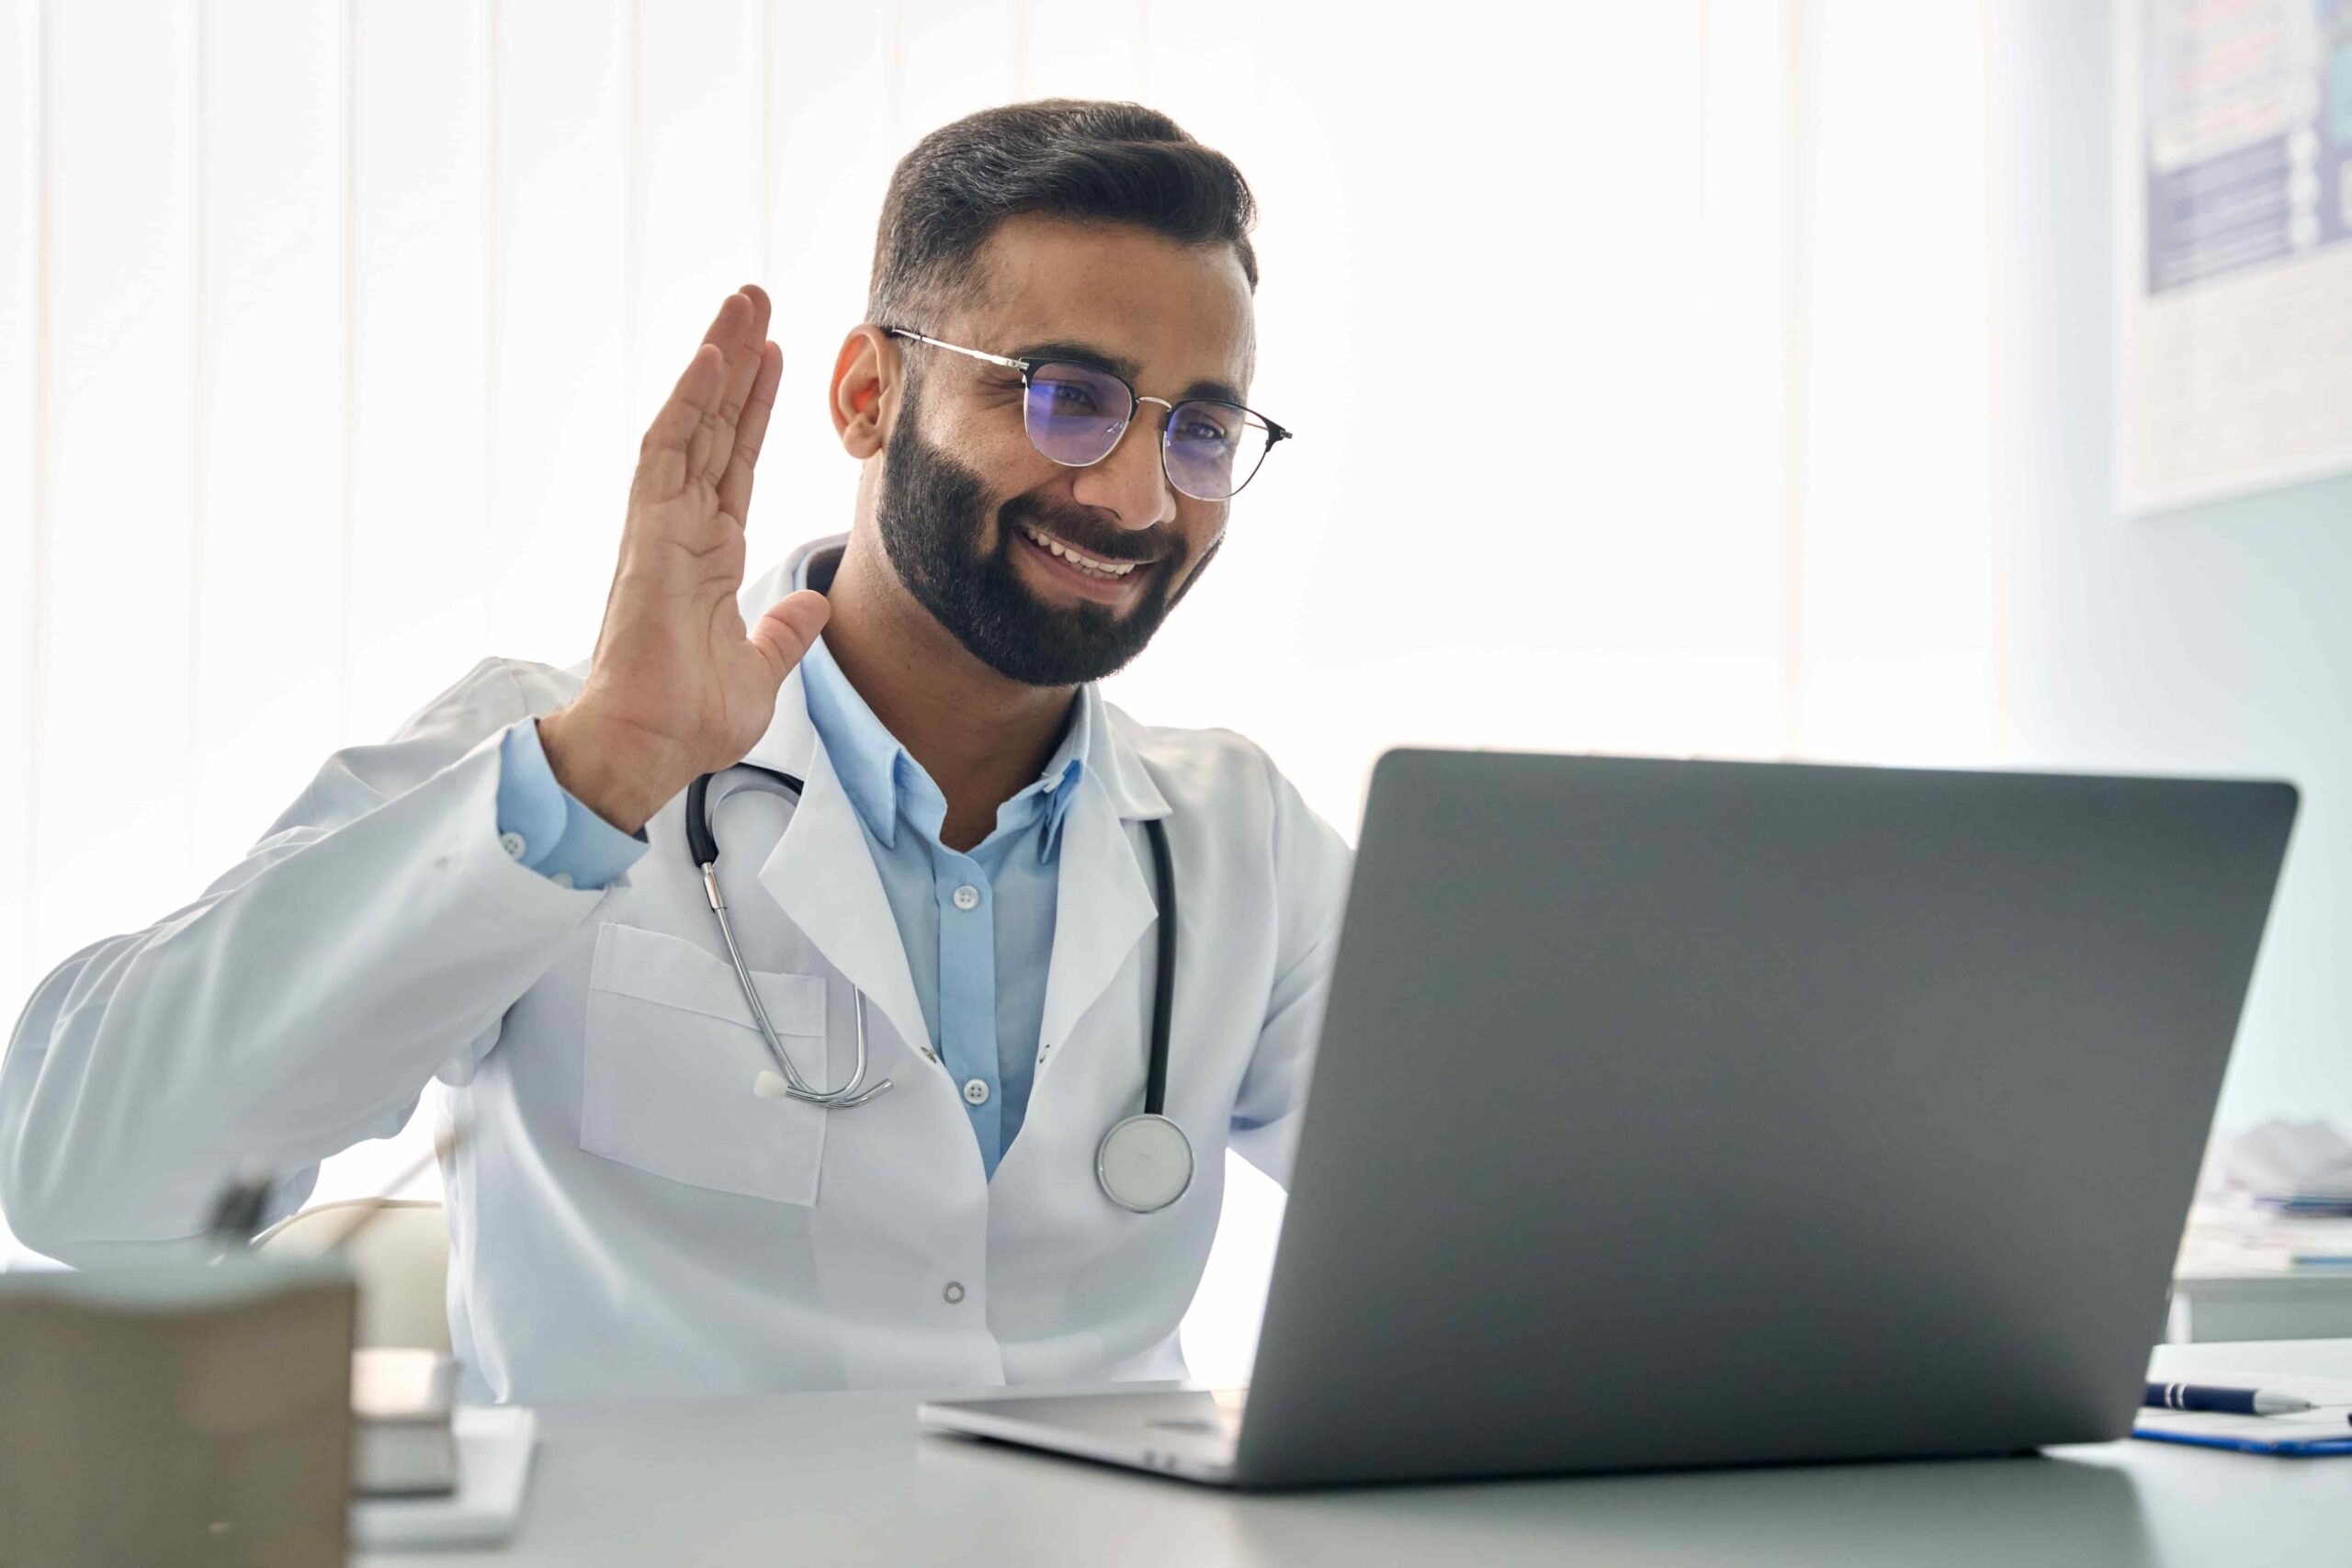 EC - Image - Stock - Physician Waving on Computer (1)